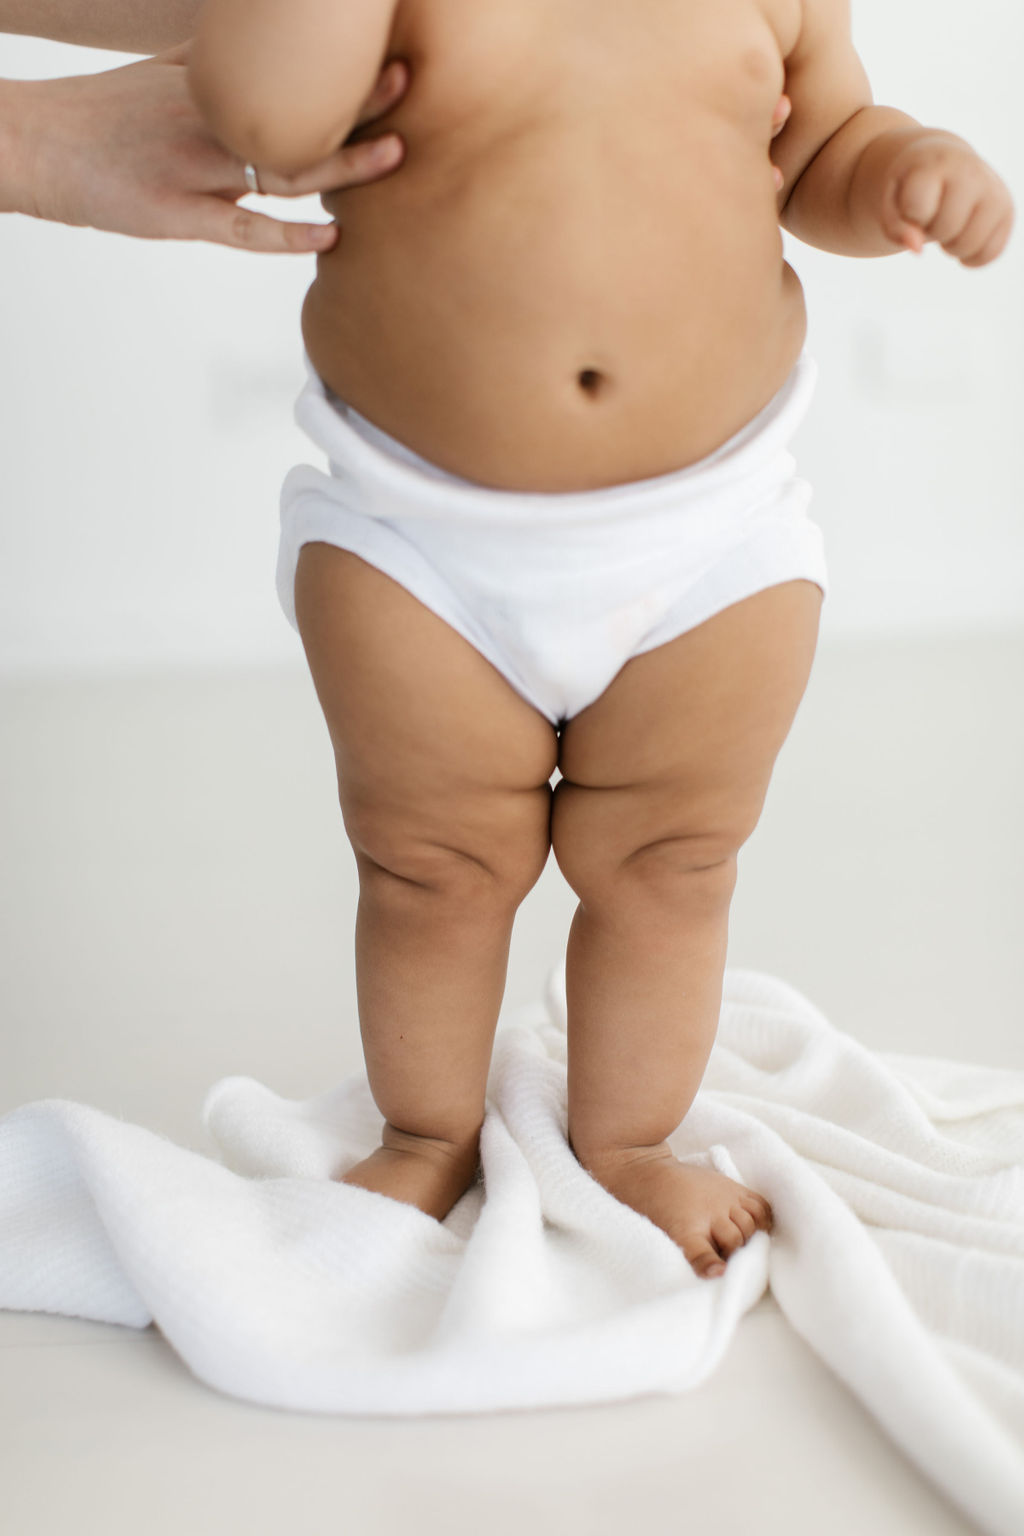 detail photo of chubby baby legs